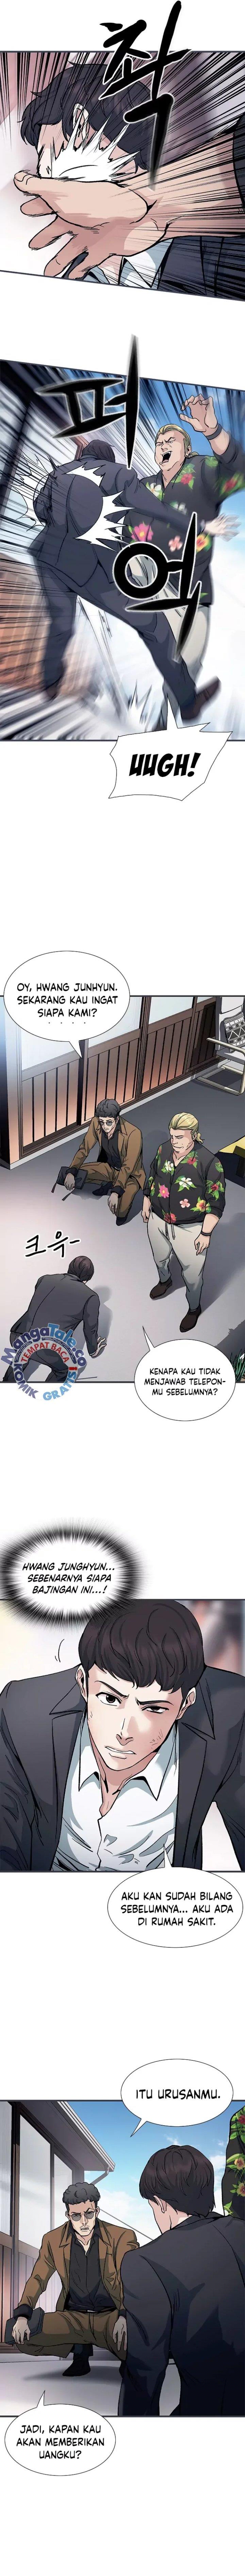 Chairman Kang, The New Employee Chapter 2